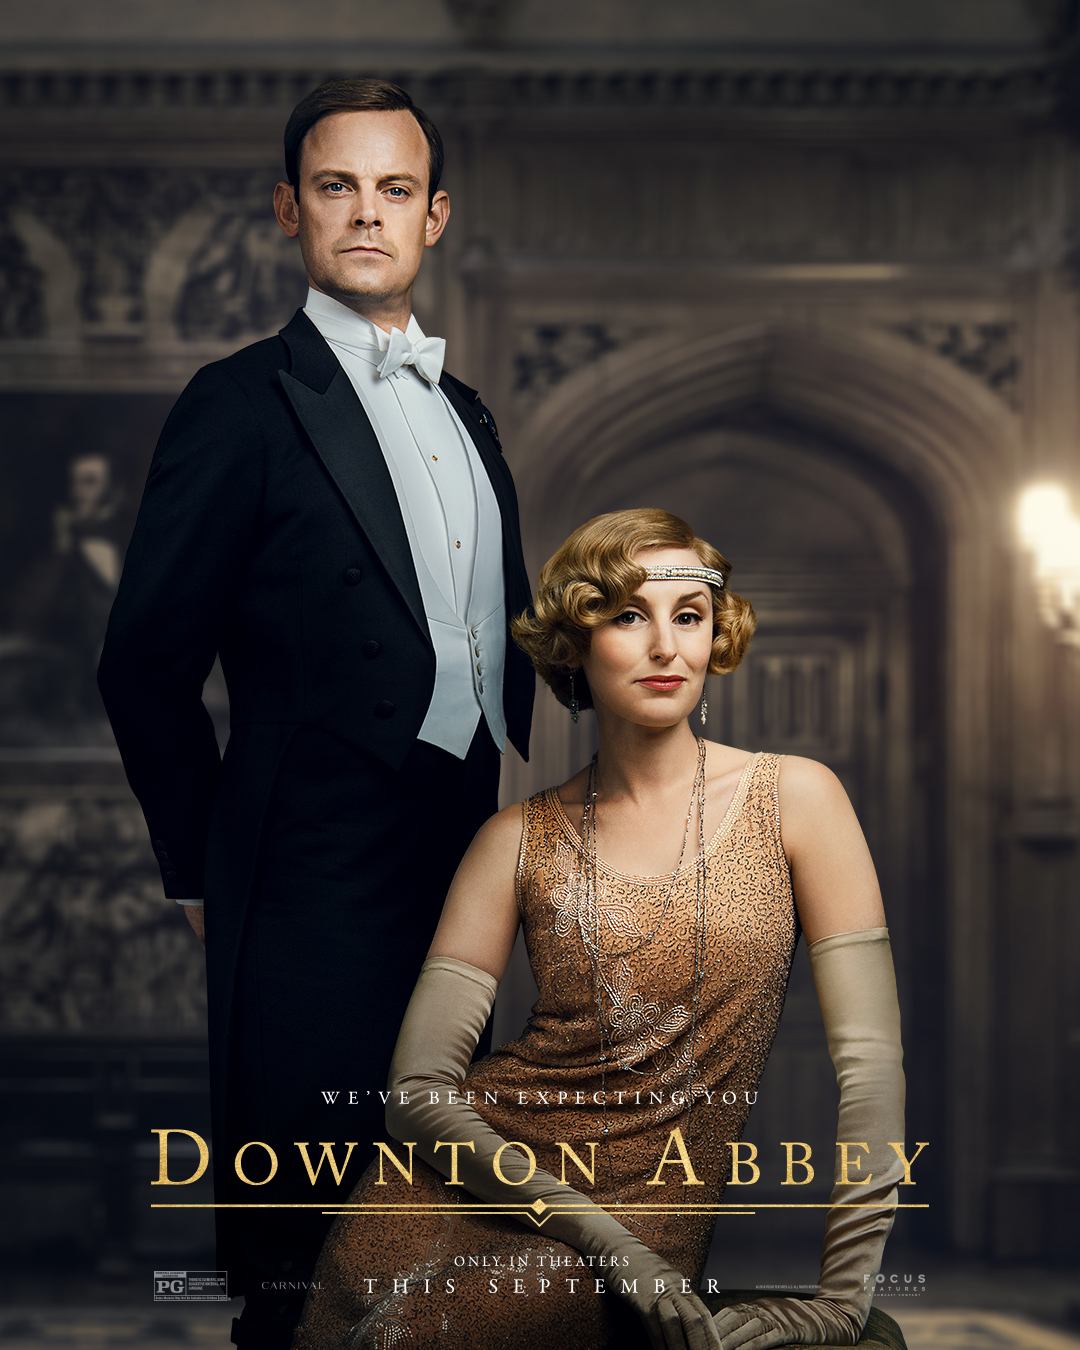 <p>In the film, Laura Carmichael's Lady Edith, the new Marchioness of Hexham, looked like the cat who got the cream after marrying to Bertie Pelham, 7th Marquess of Hexham (played by Harry Hadden-Paton) -- a move that meant she outranked all the women in her family (even her mother!). Her wardrobe -- including this gorgeous peach-hued beaded dress and gold, pearl and diamond accessories -- reflected her newfound joy following years of drama and heartbreak. "I tended to find original pieces that would usually fit Laura Carmichael like a dream," costume designer Anna Mary Scott Robbins told <a href="https://fashionista.com/2019/09/downton-abbey-movie-costumes">Fashionista</a>. "The thing about Edith is that she's always complicated and she blossomed in series six. Her fashion blossoms as much as her personal life. I wanted to take that on into the film, because she's found herself."</p>